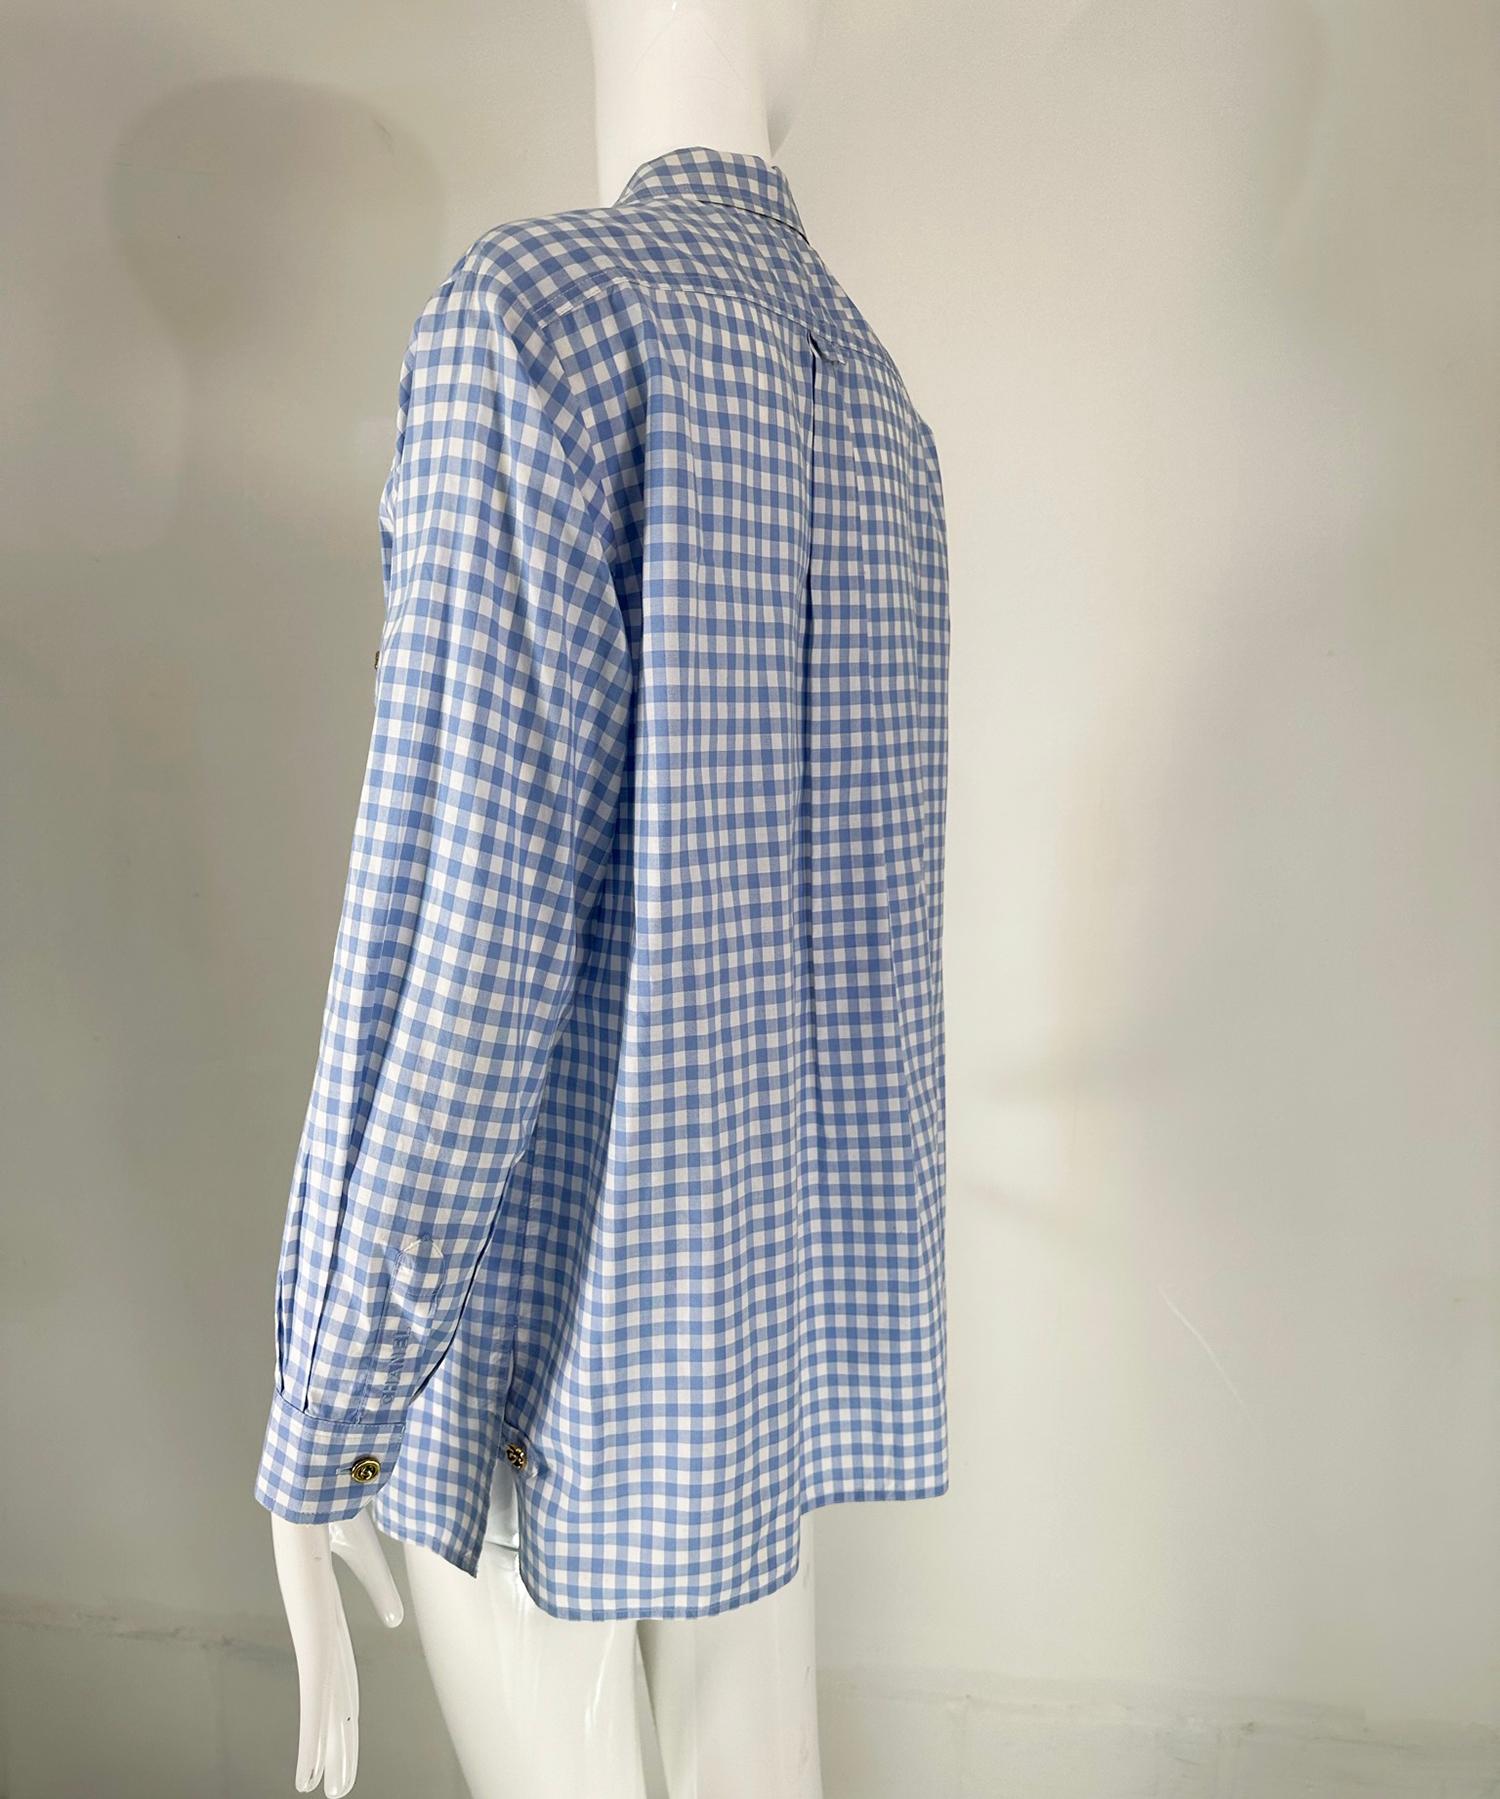 Chanel S/S 1995 Blue & White Cotton Check Long Sleeve Button Front Blouse 1